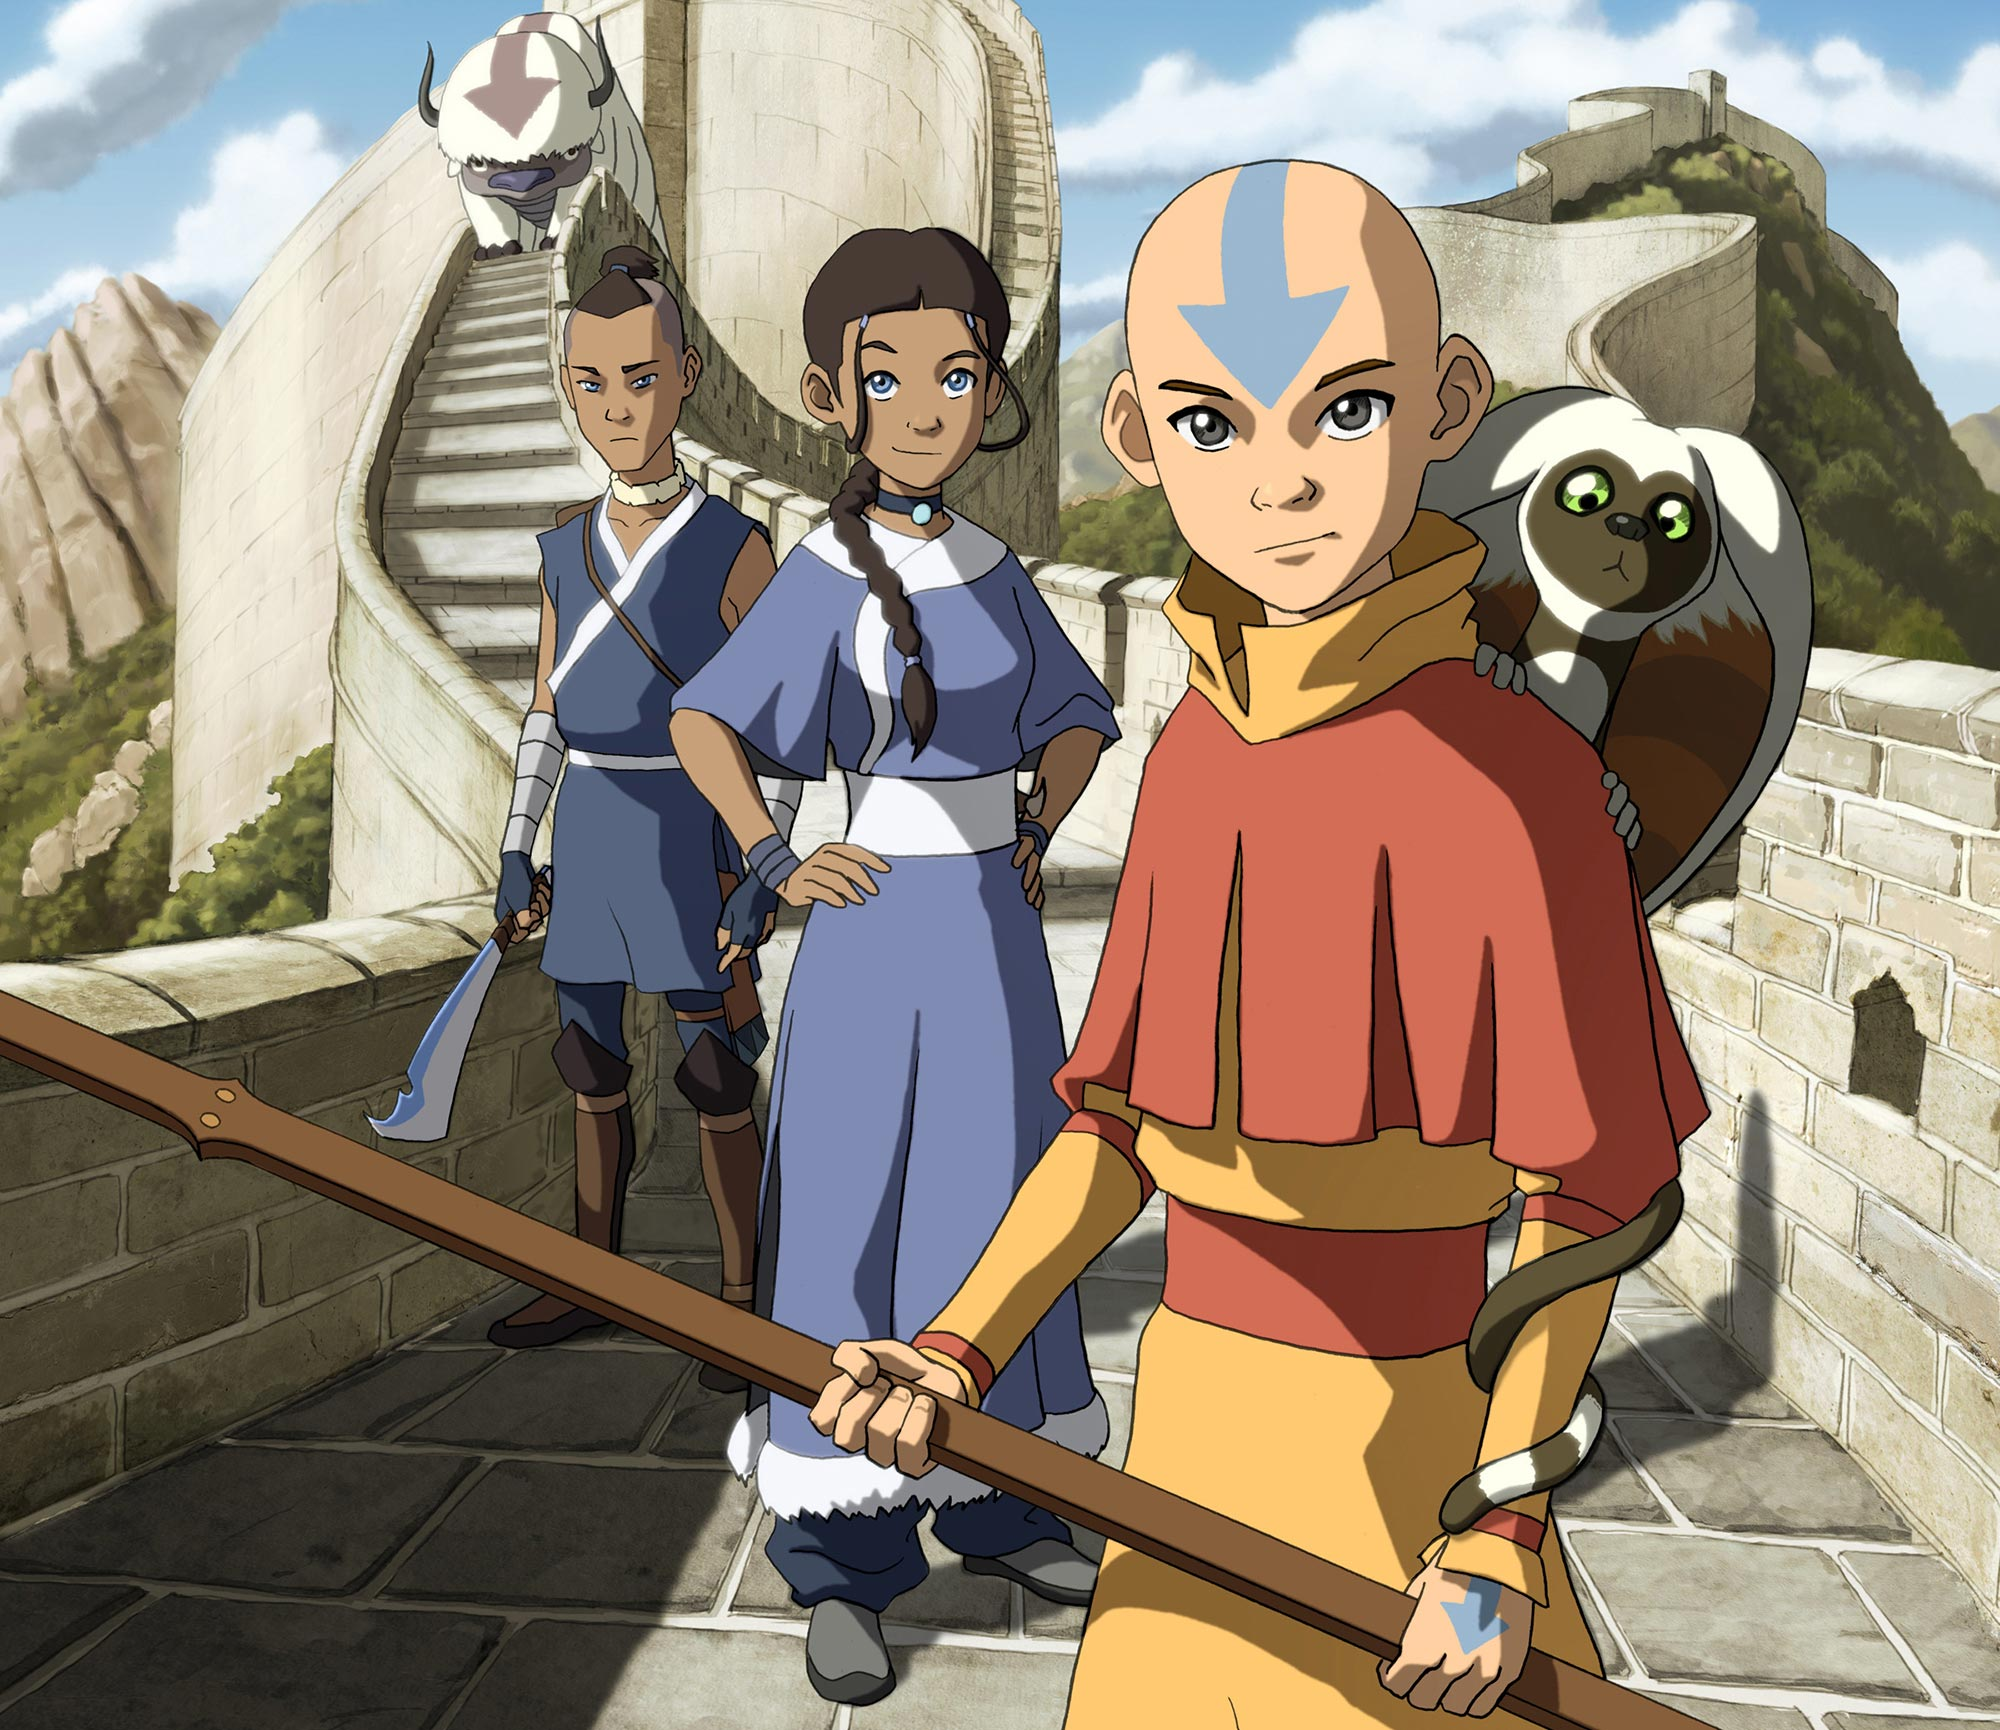 The 15 best episodes of Avatar: The Last Airbender